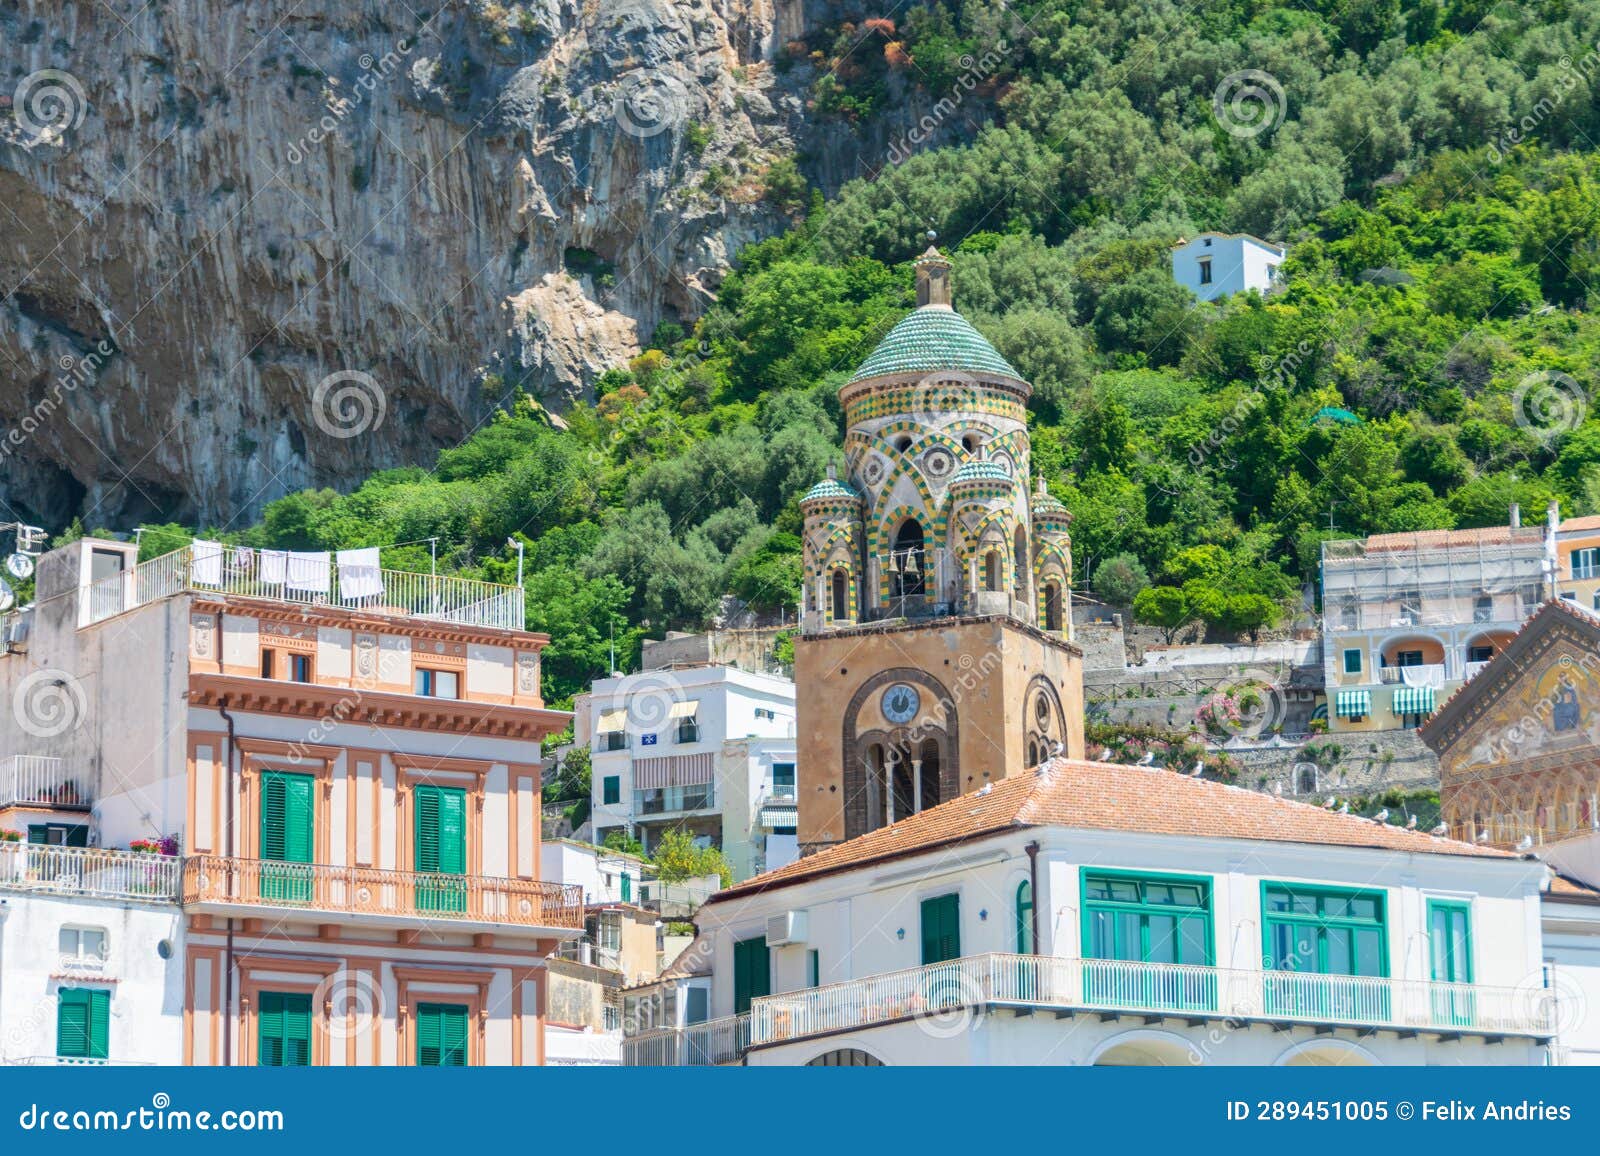 Duomo Di Amalfi - Saint Andrew Cathedral, Italy Stock Image - Image of ...